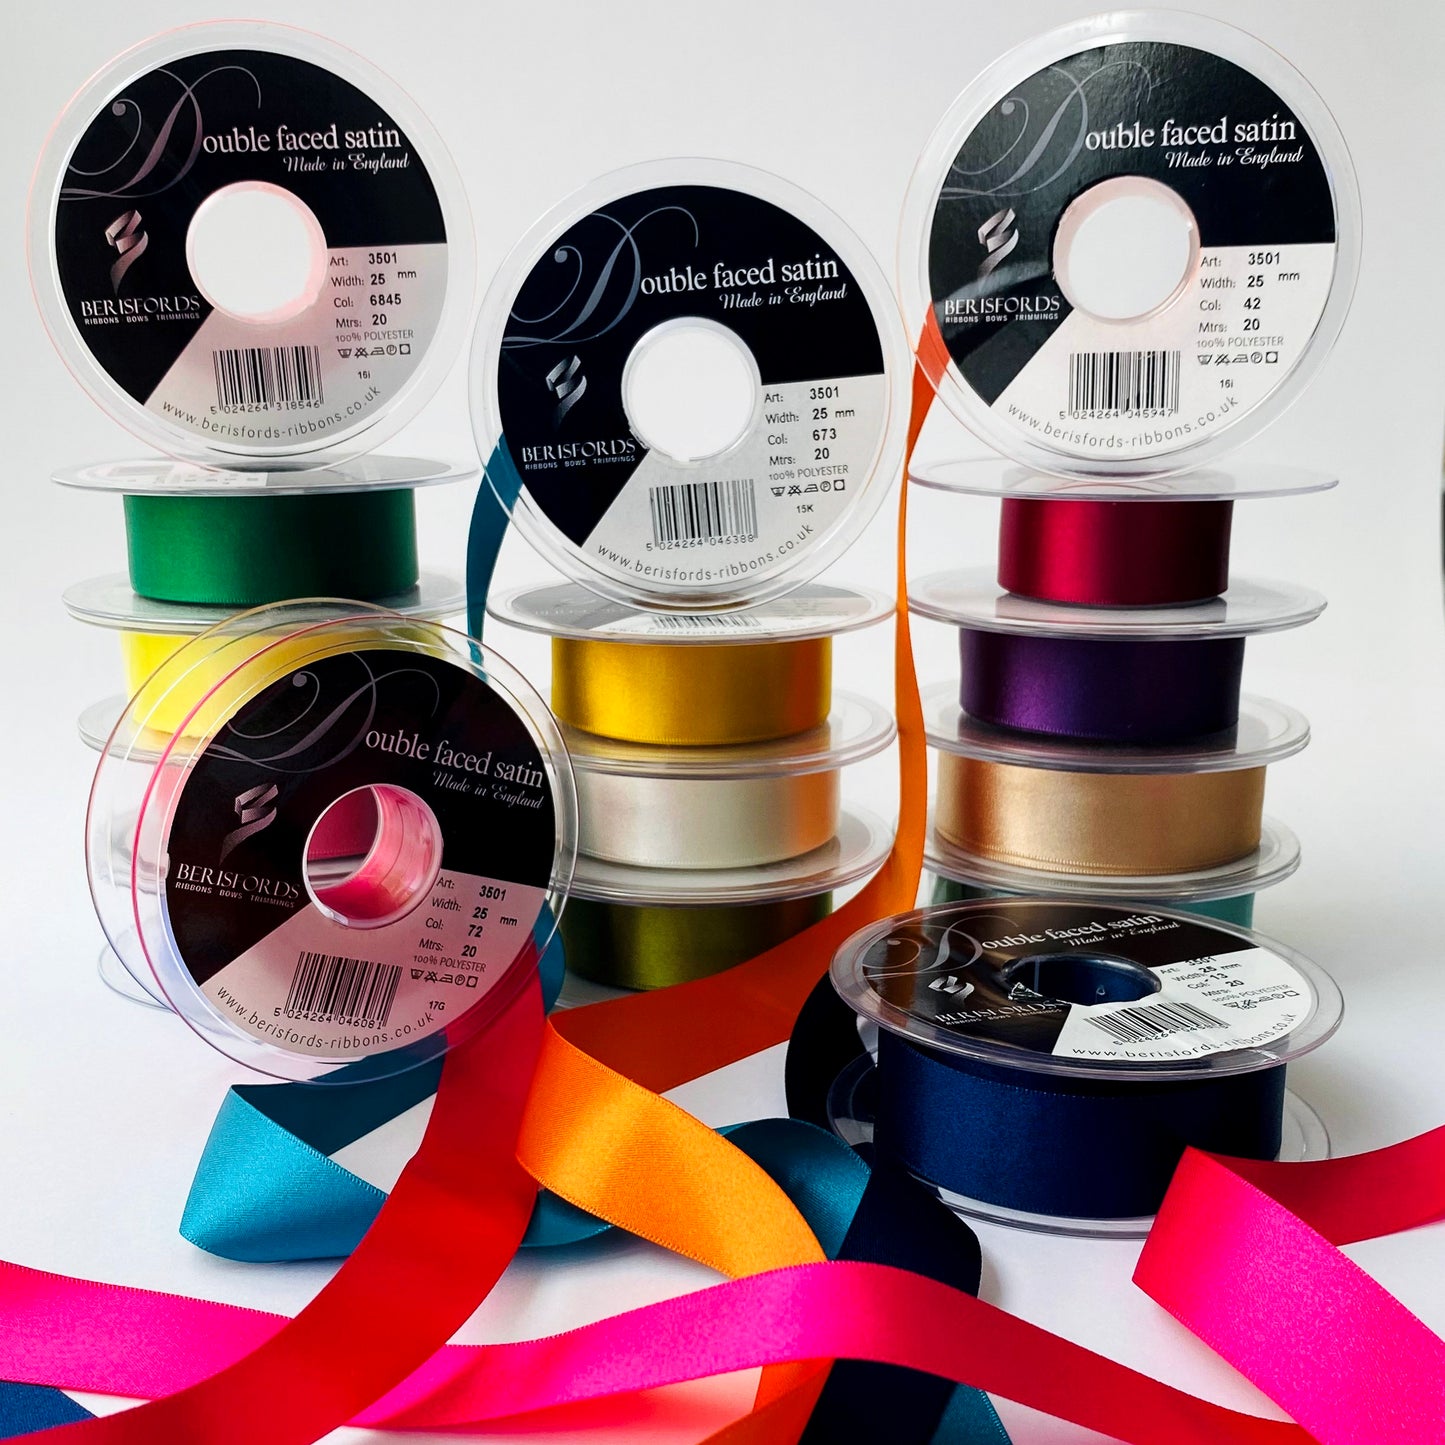 25mm double face sided satin ribbon